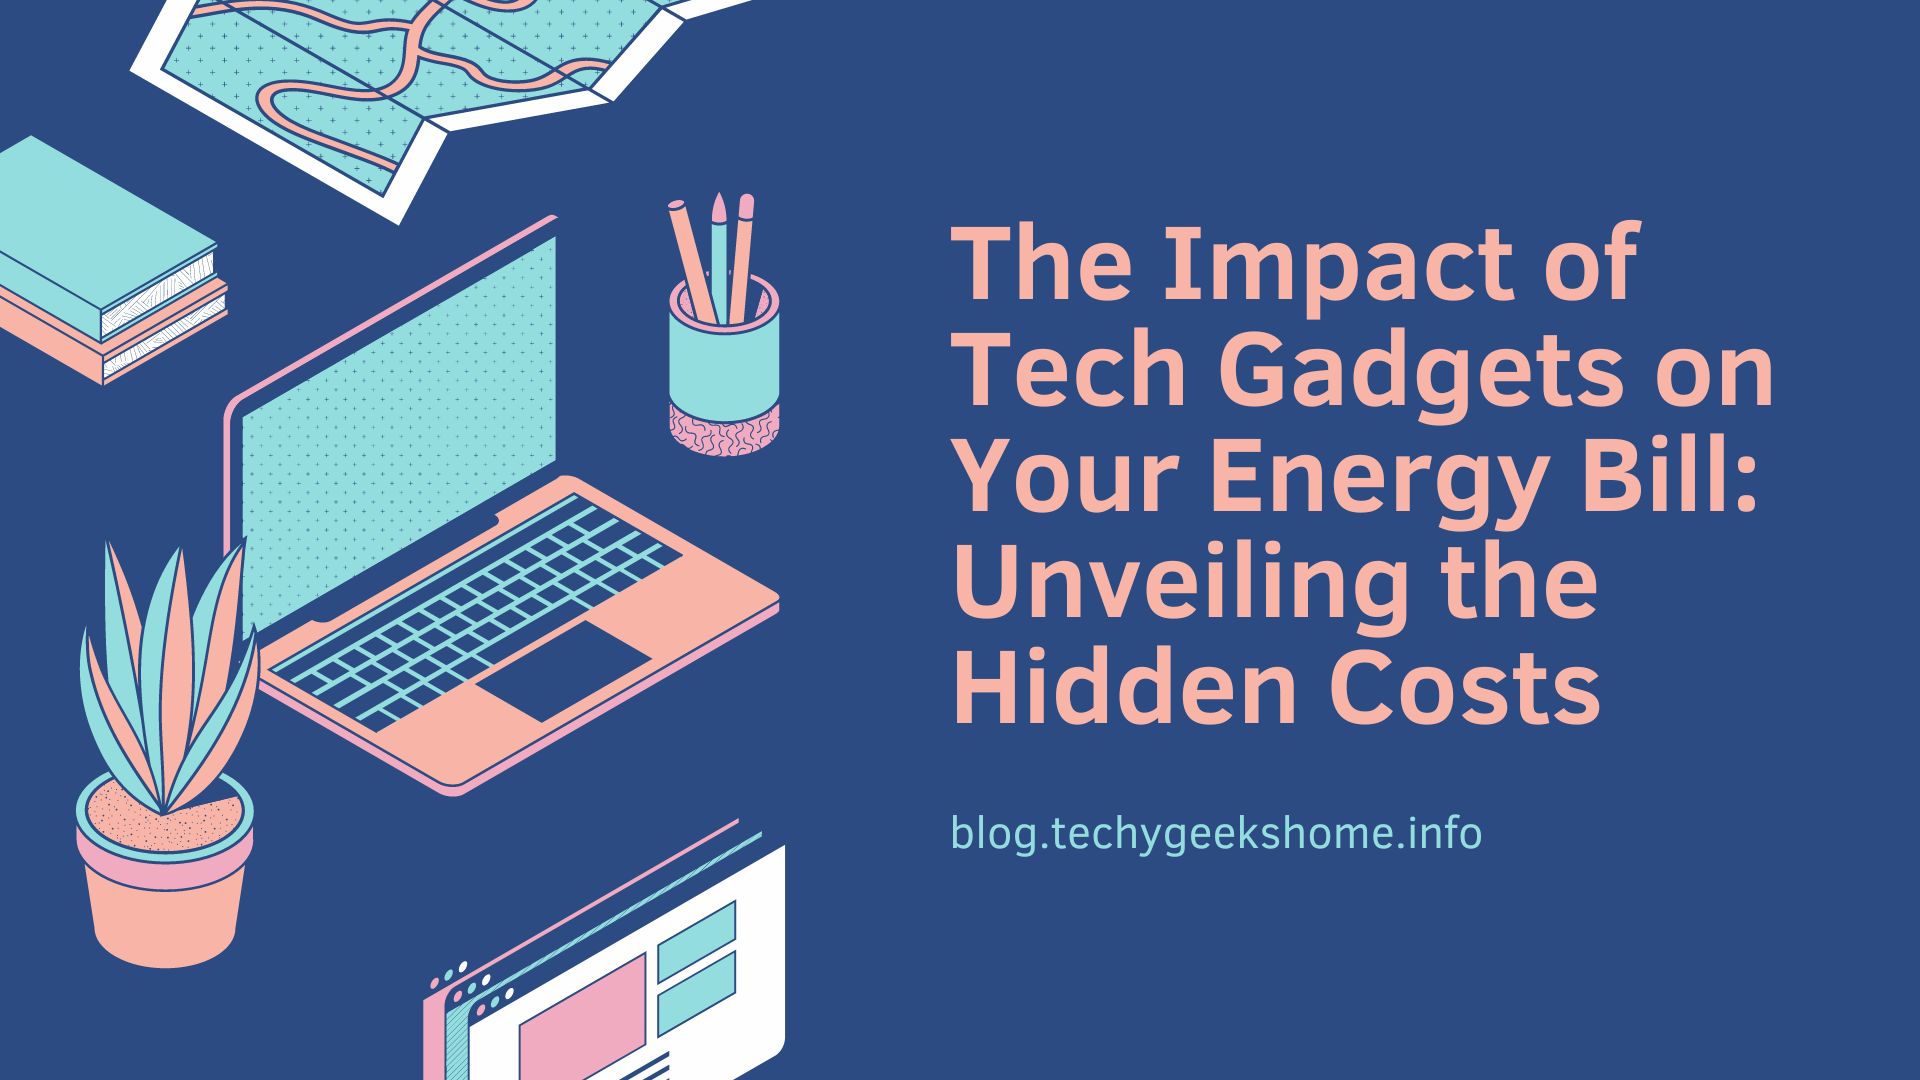 The Impact of Tech Gadgets on Your Energy Bill: Unveiling the Hidden Costs